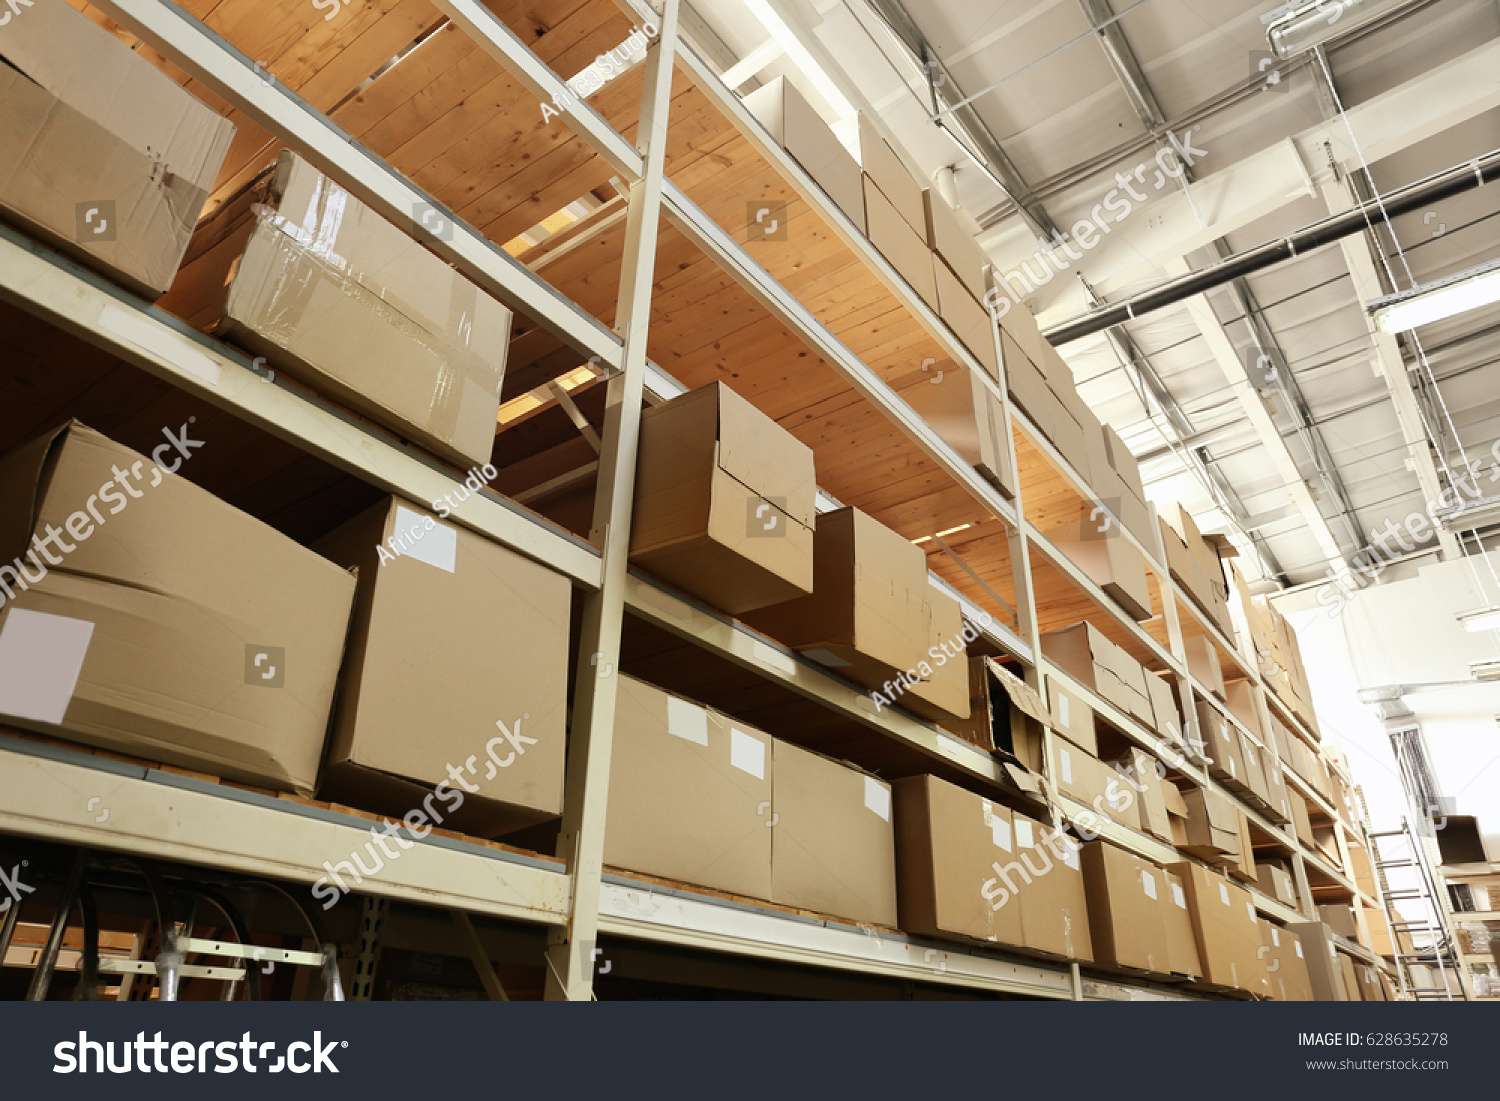 Boxes with goods in wholesale warehouse #628635278